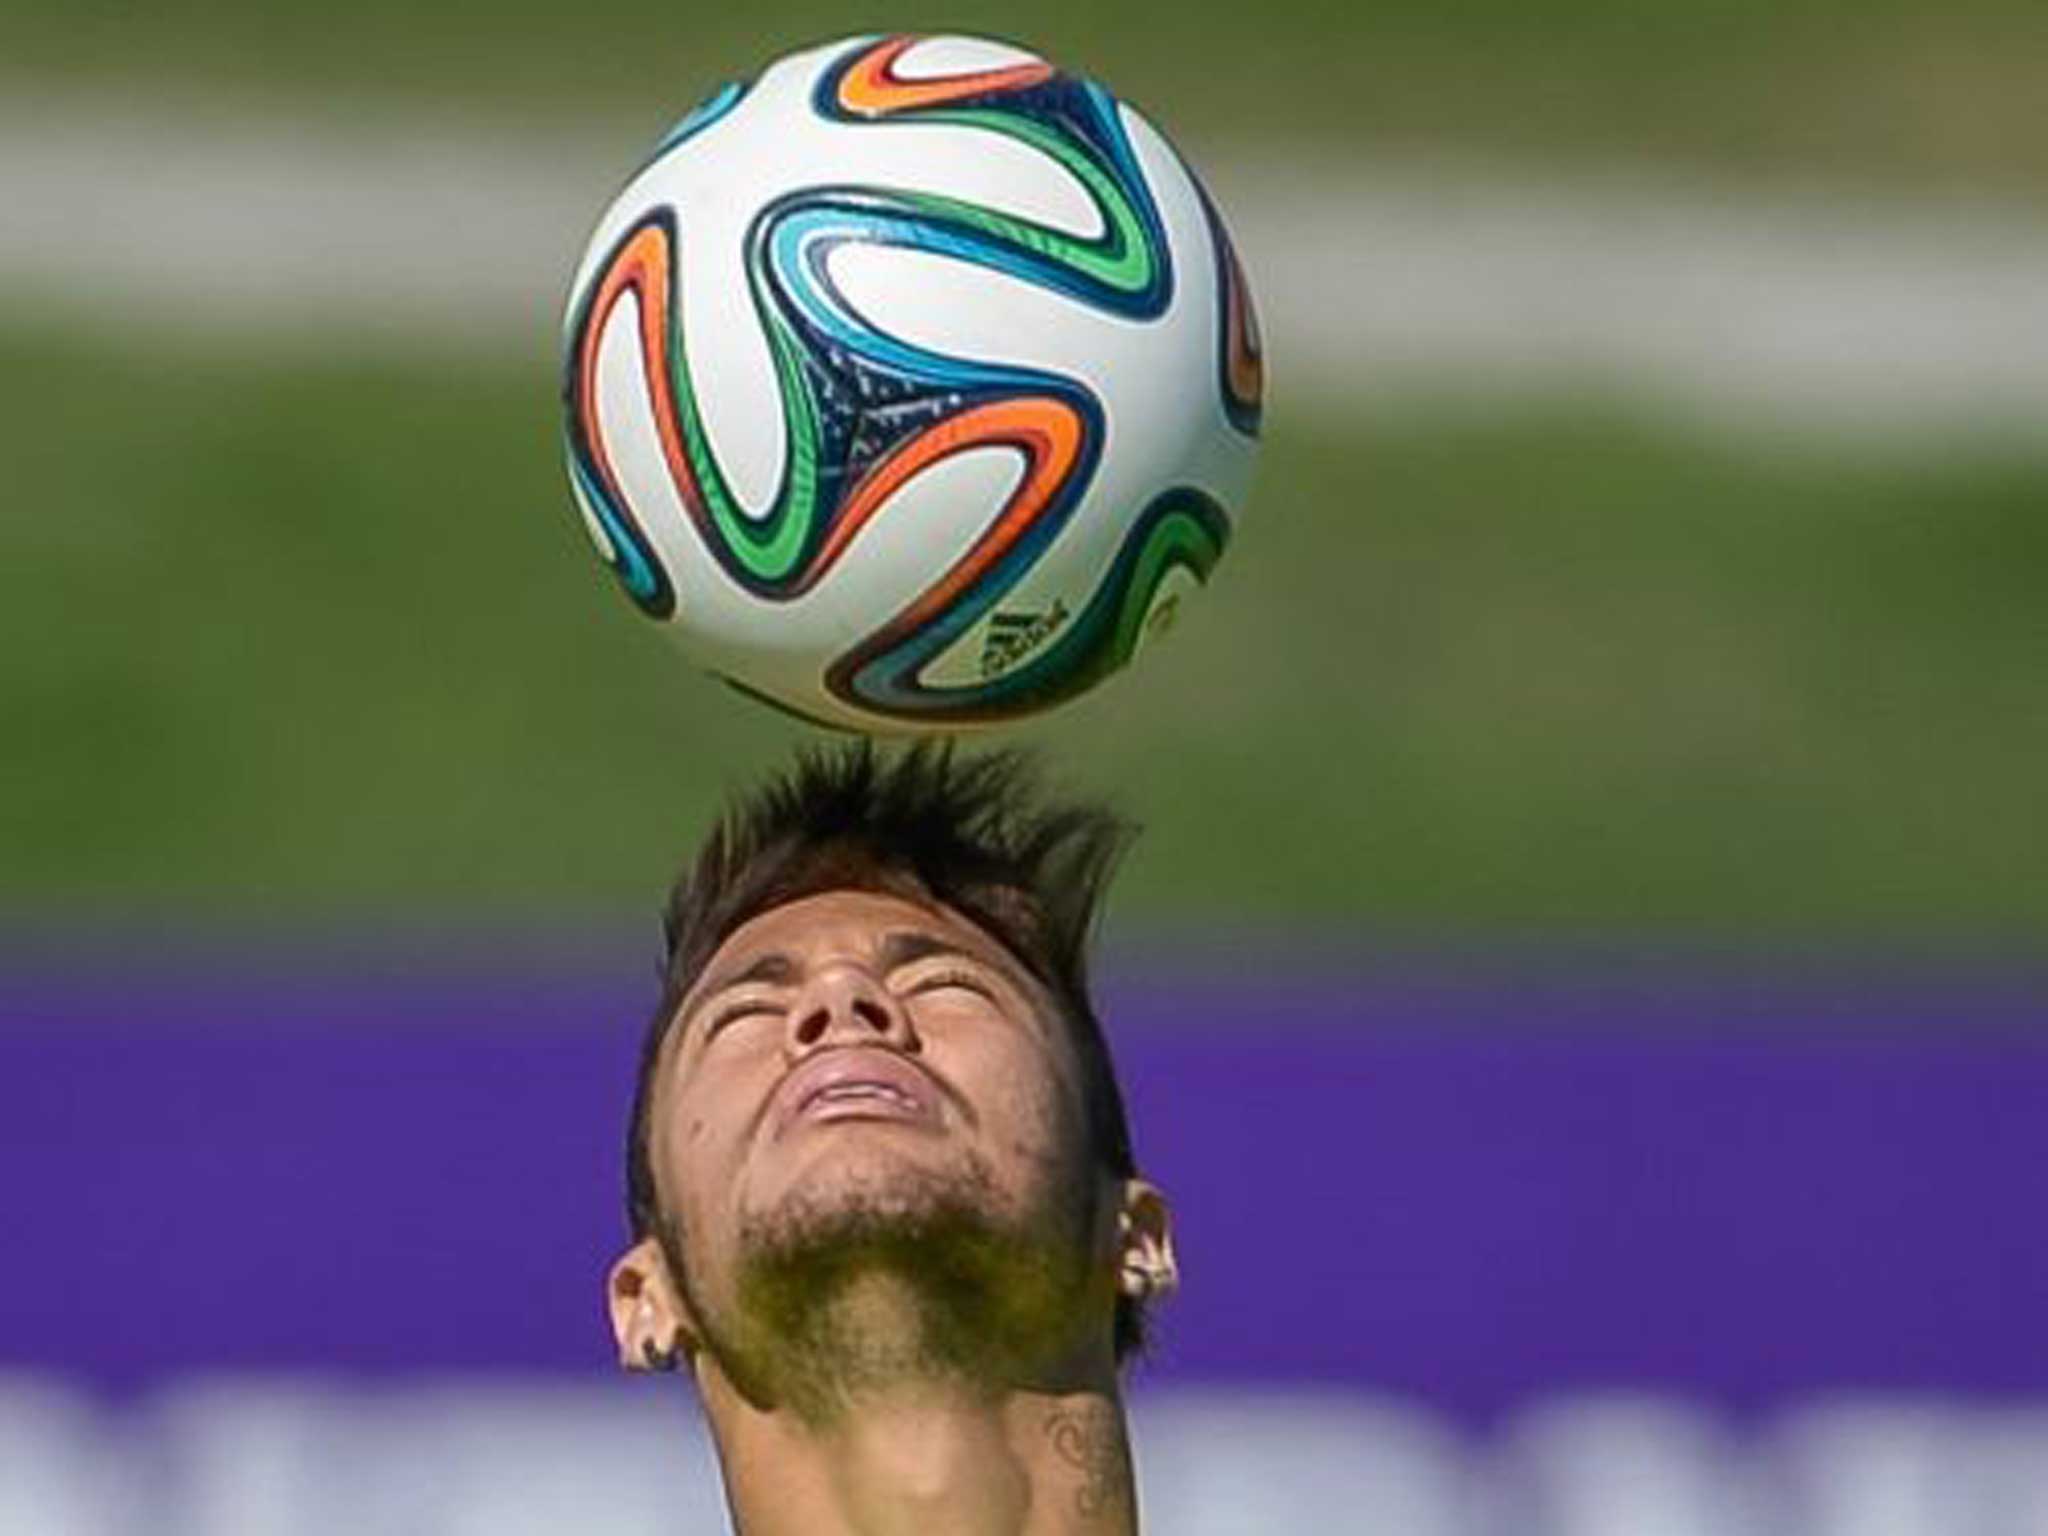 Neymar in action during a training session of the Brazilian national football team